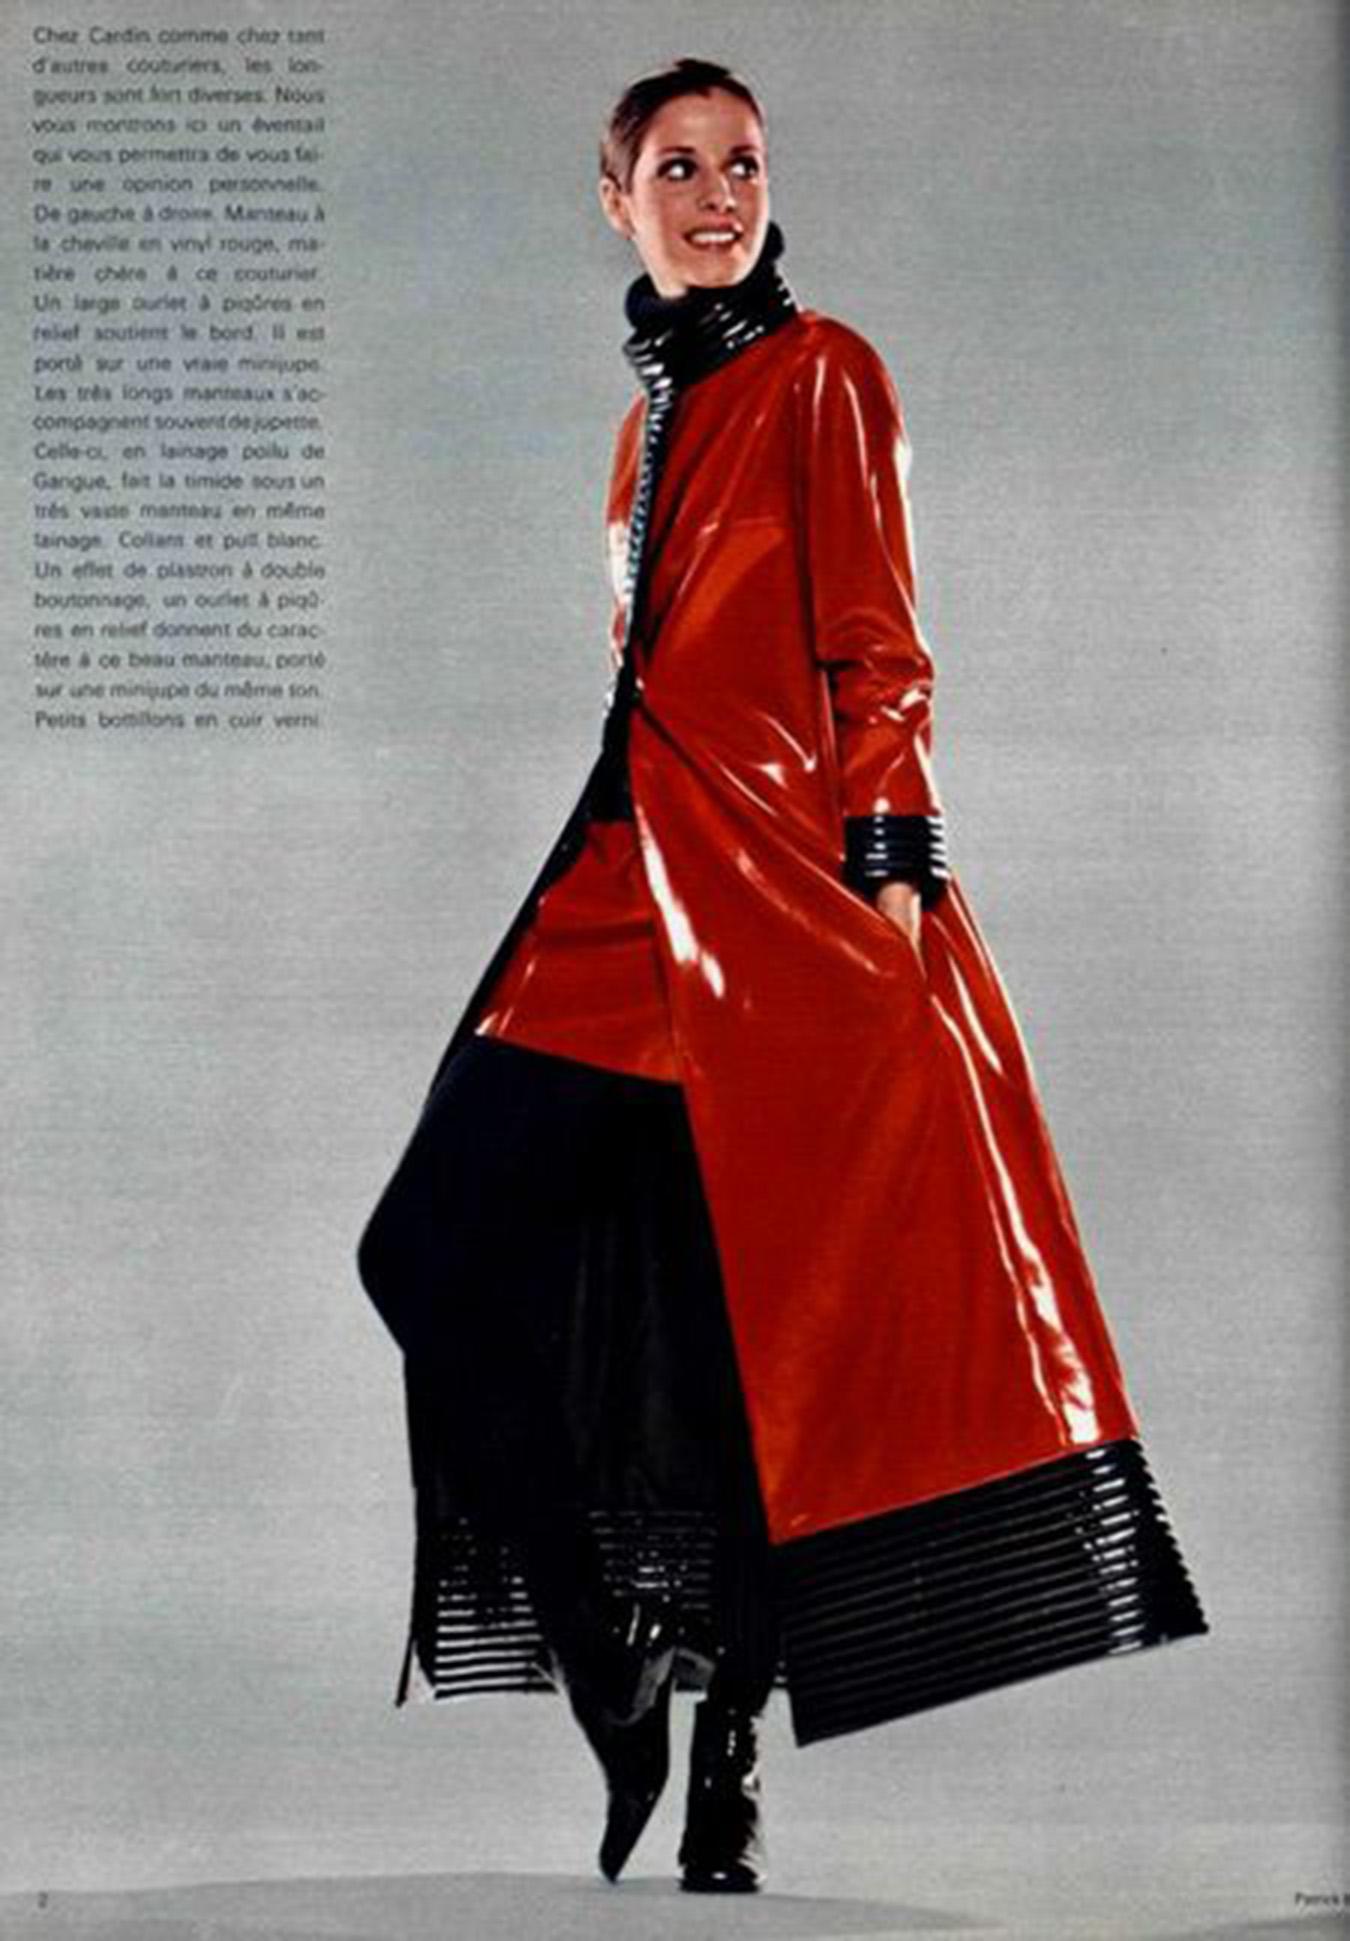 An absolutely iconic and well-documented Pierre Cardin red and black vinyl maxi length mod coat dating back to his epic 1969-70 fall/winter collection. As shown, this archival piece had a full page editorial in L'Officiel magazine and is part of